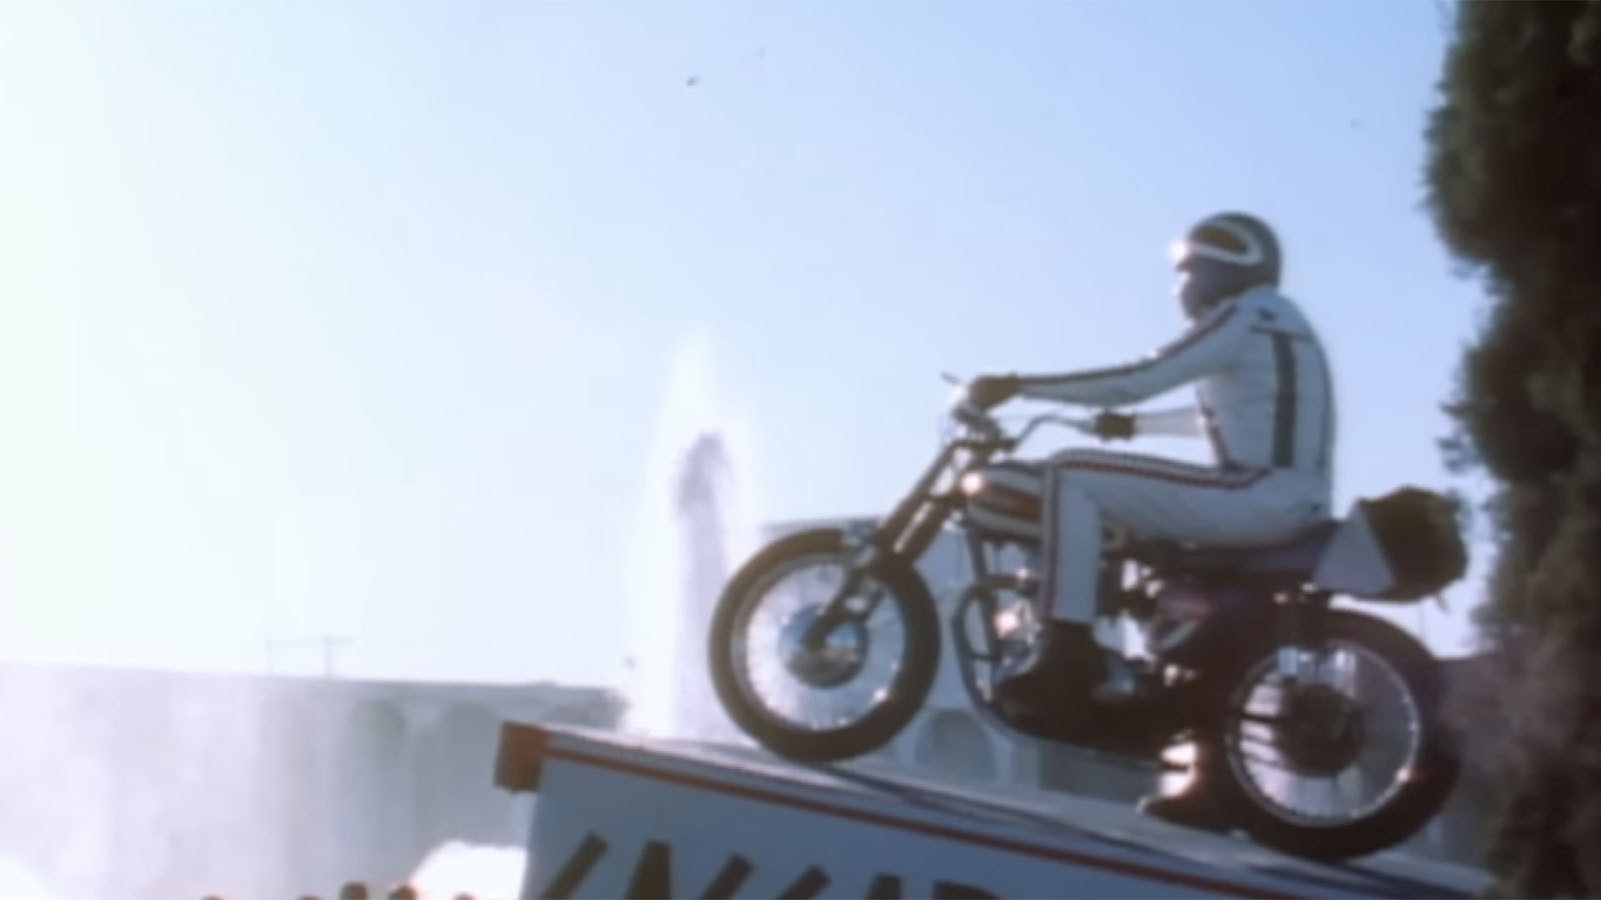 Evel Knievel studies the jump at Caesars Palace from the takeoff ramp.